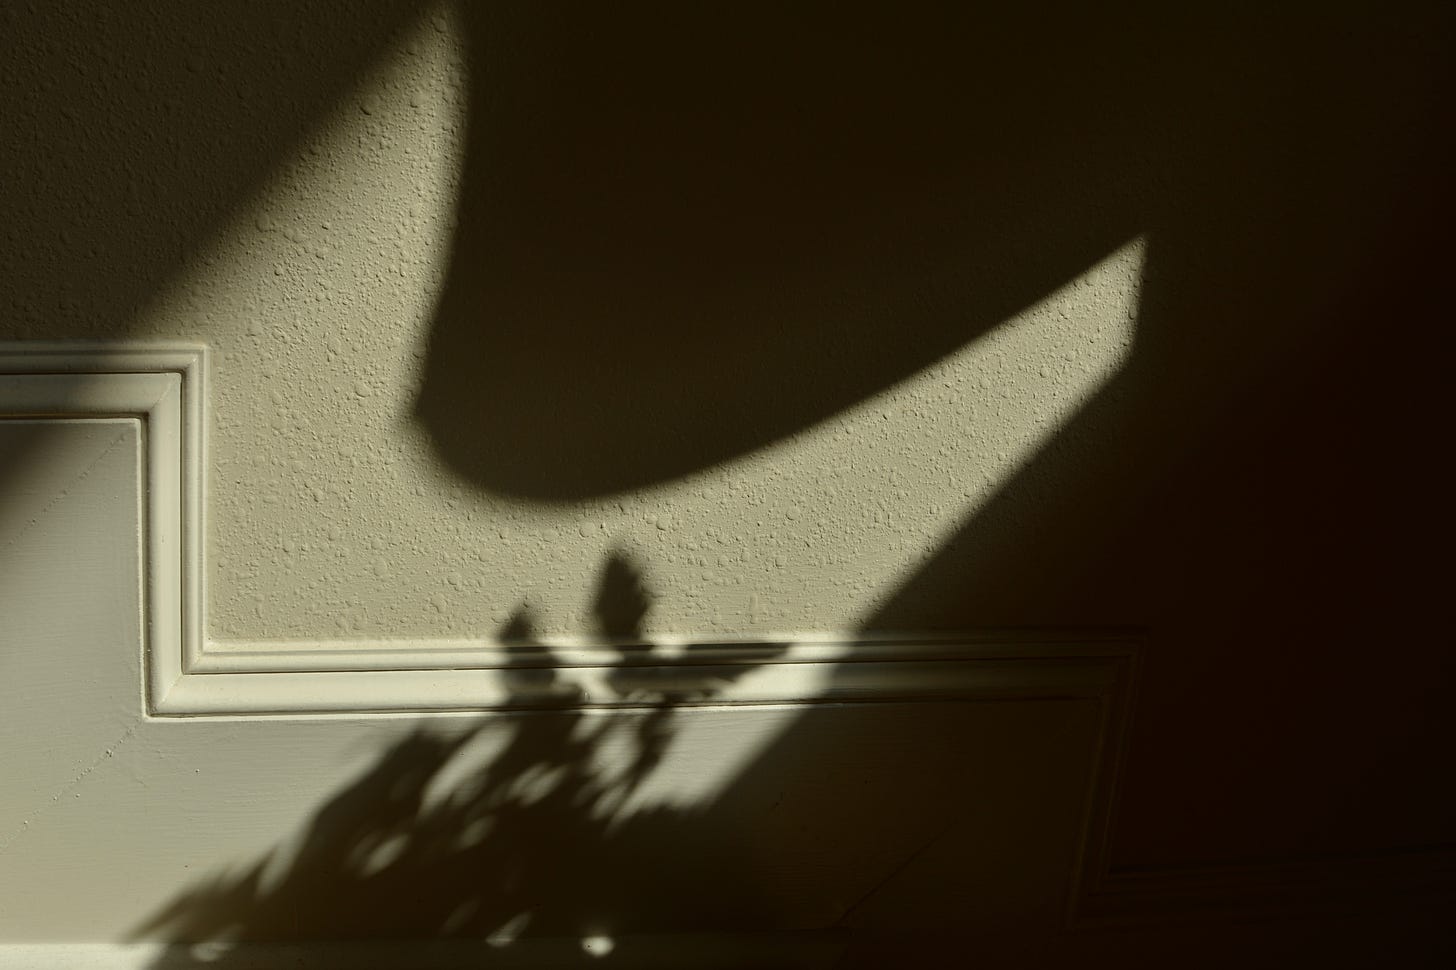 odd shadow shaped caused by sunlight in the room